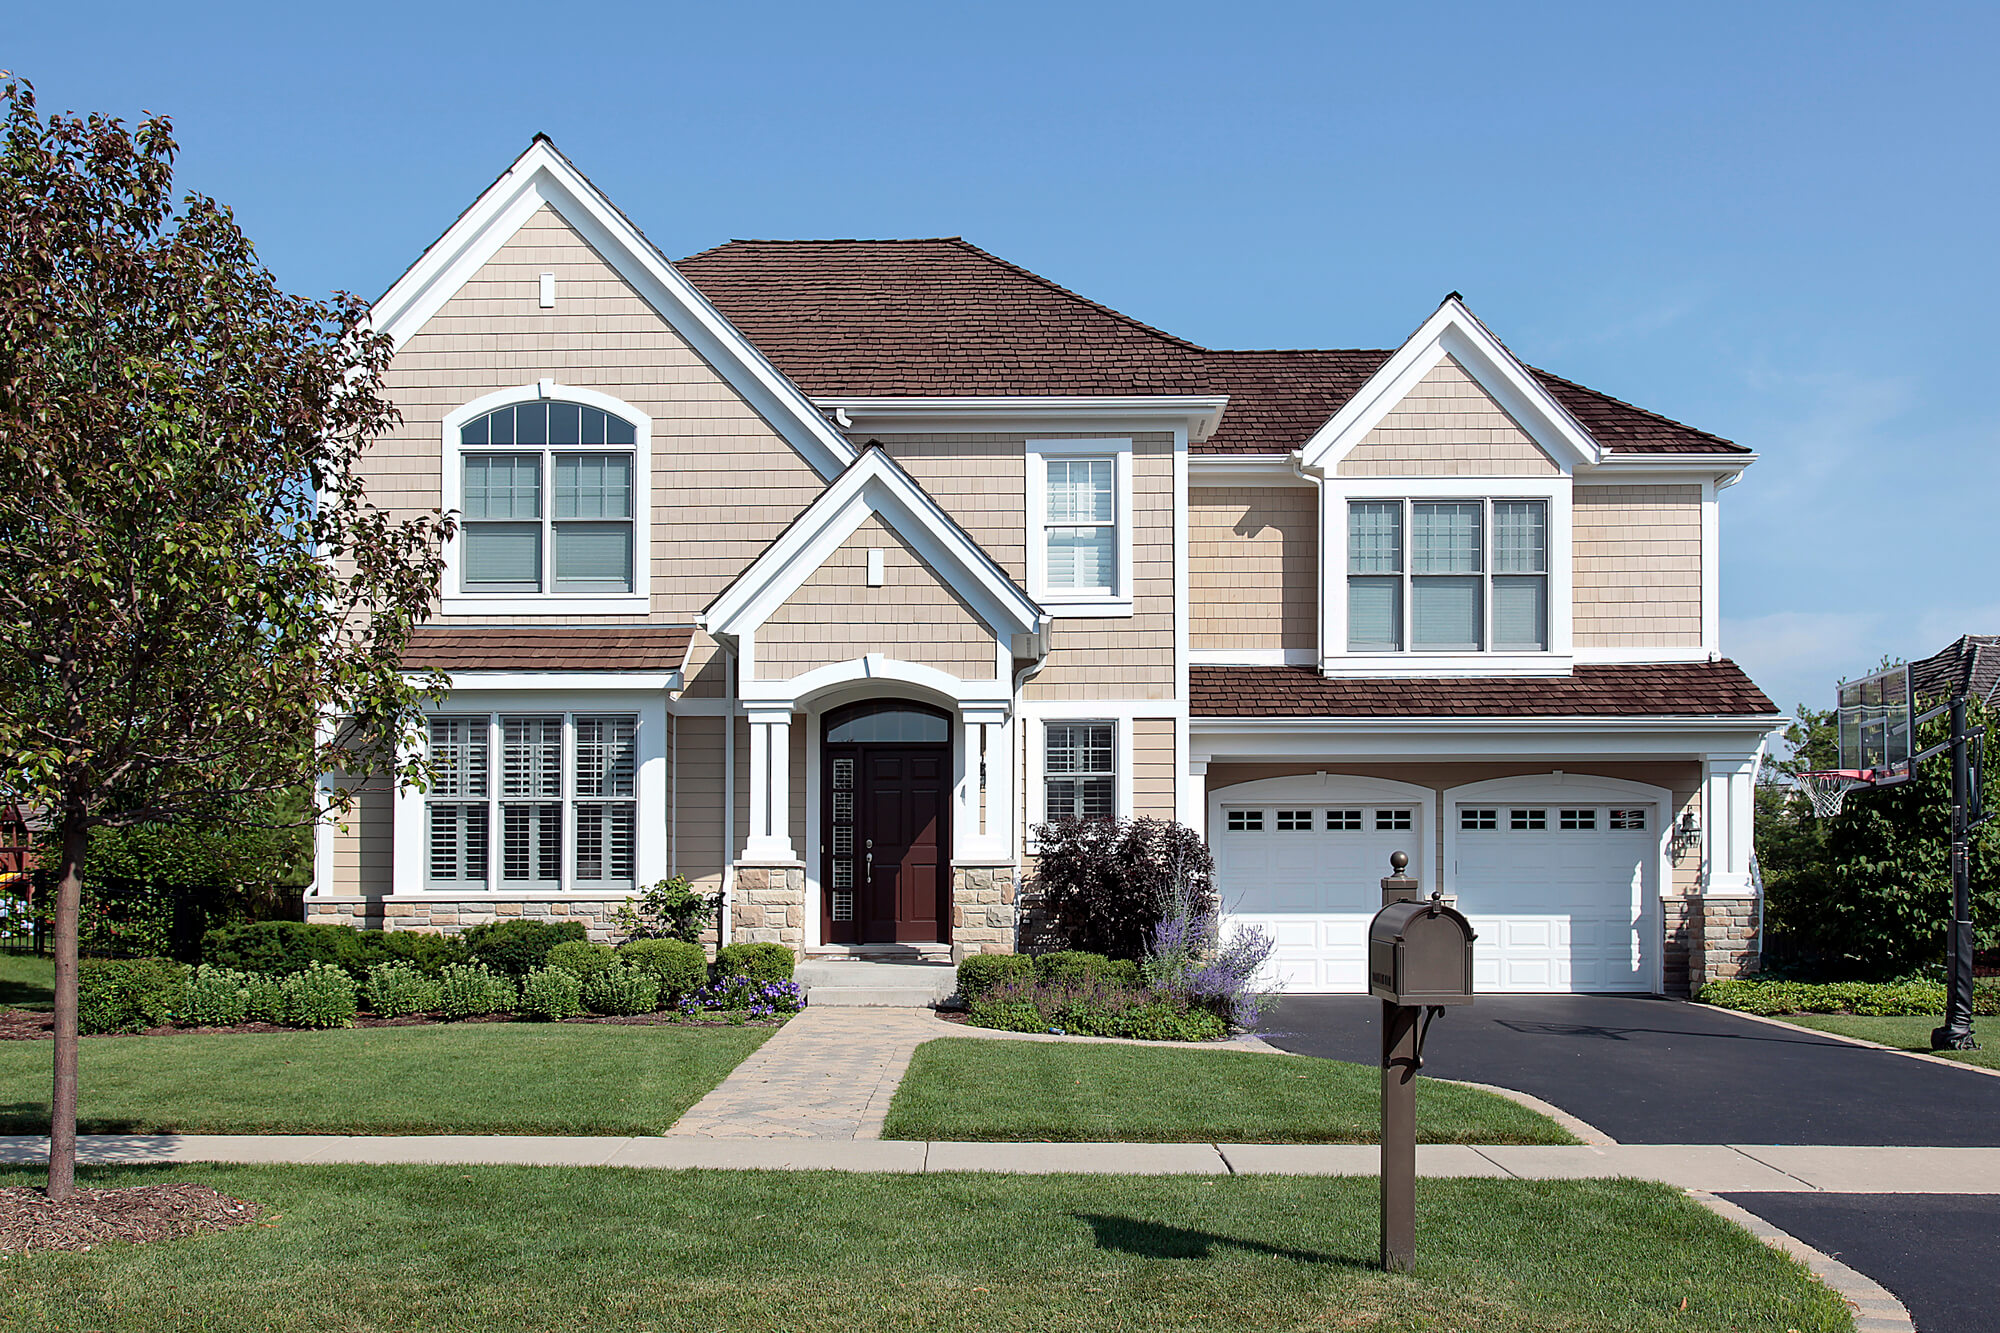 What color siding is the most popular on a house?